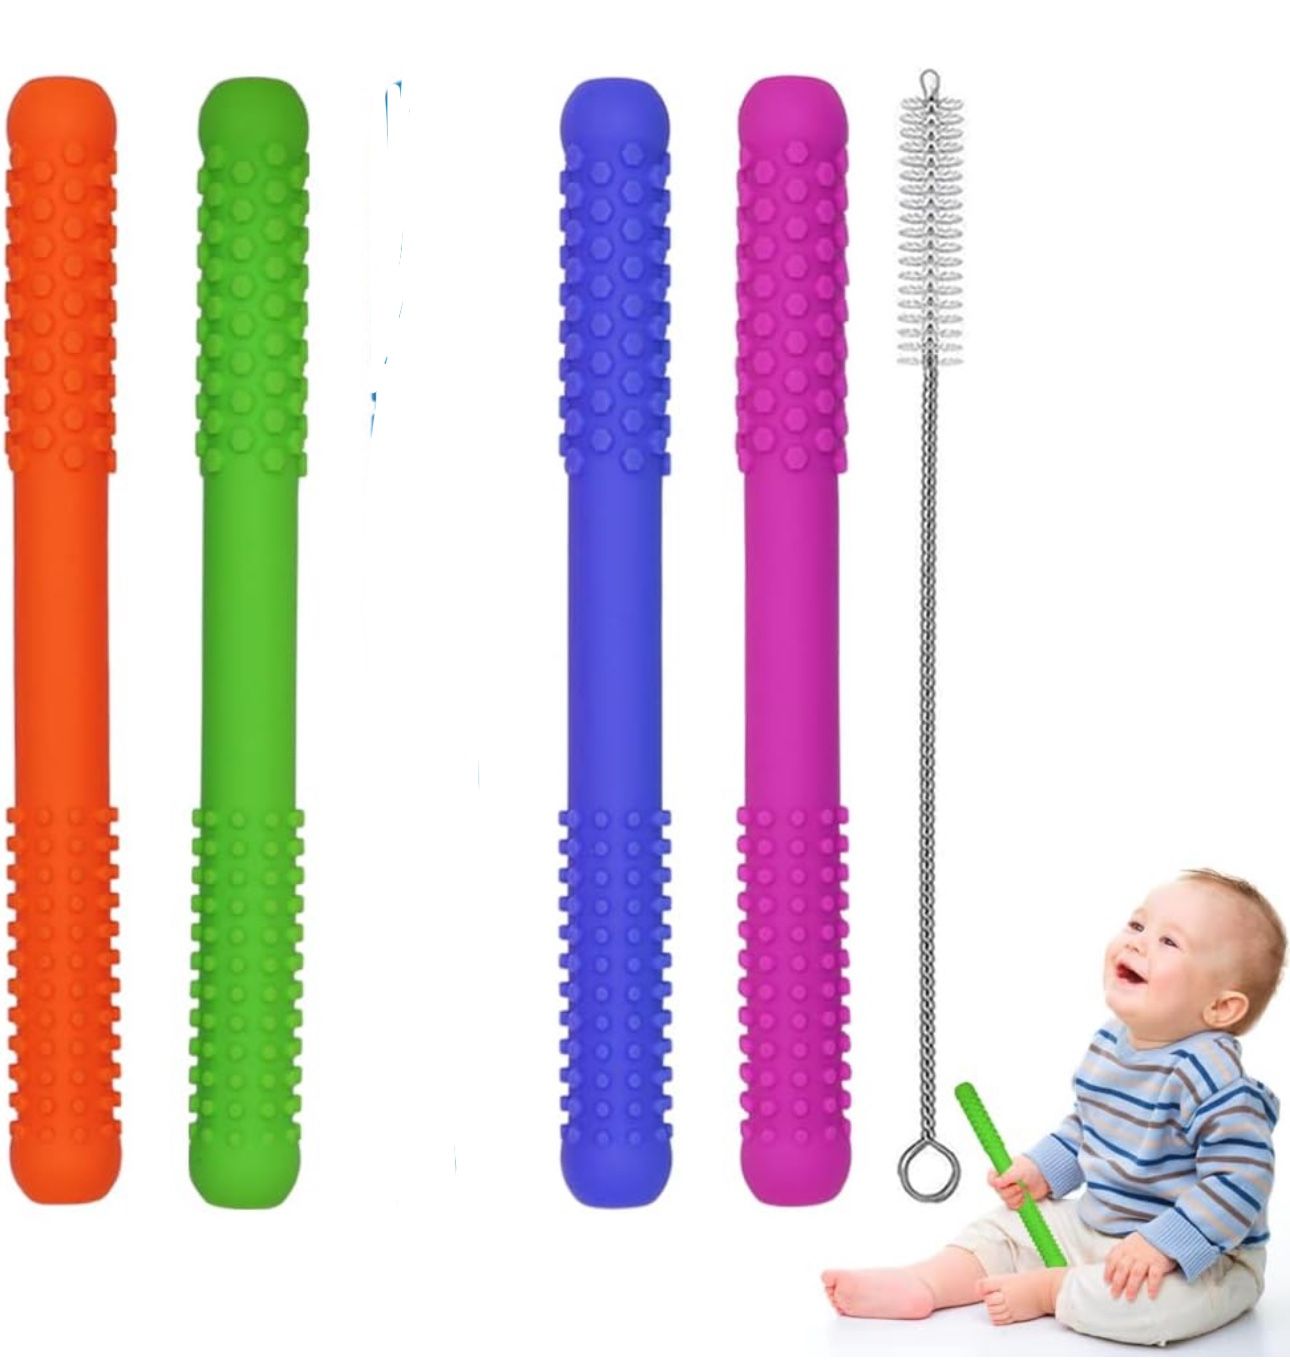 B2 Hollow Teething Tubes Toys for Babies Girls Boys, 4 Pack Silicone Baby Teether Toy Tube for Infants with Nursing Biting Chewing, Chew Straws 